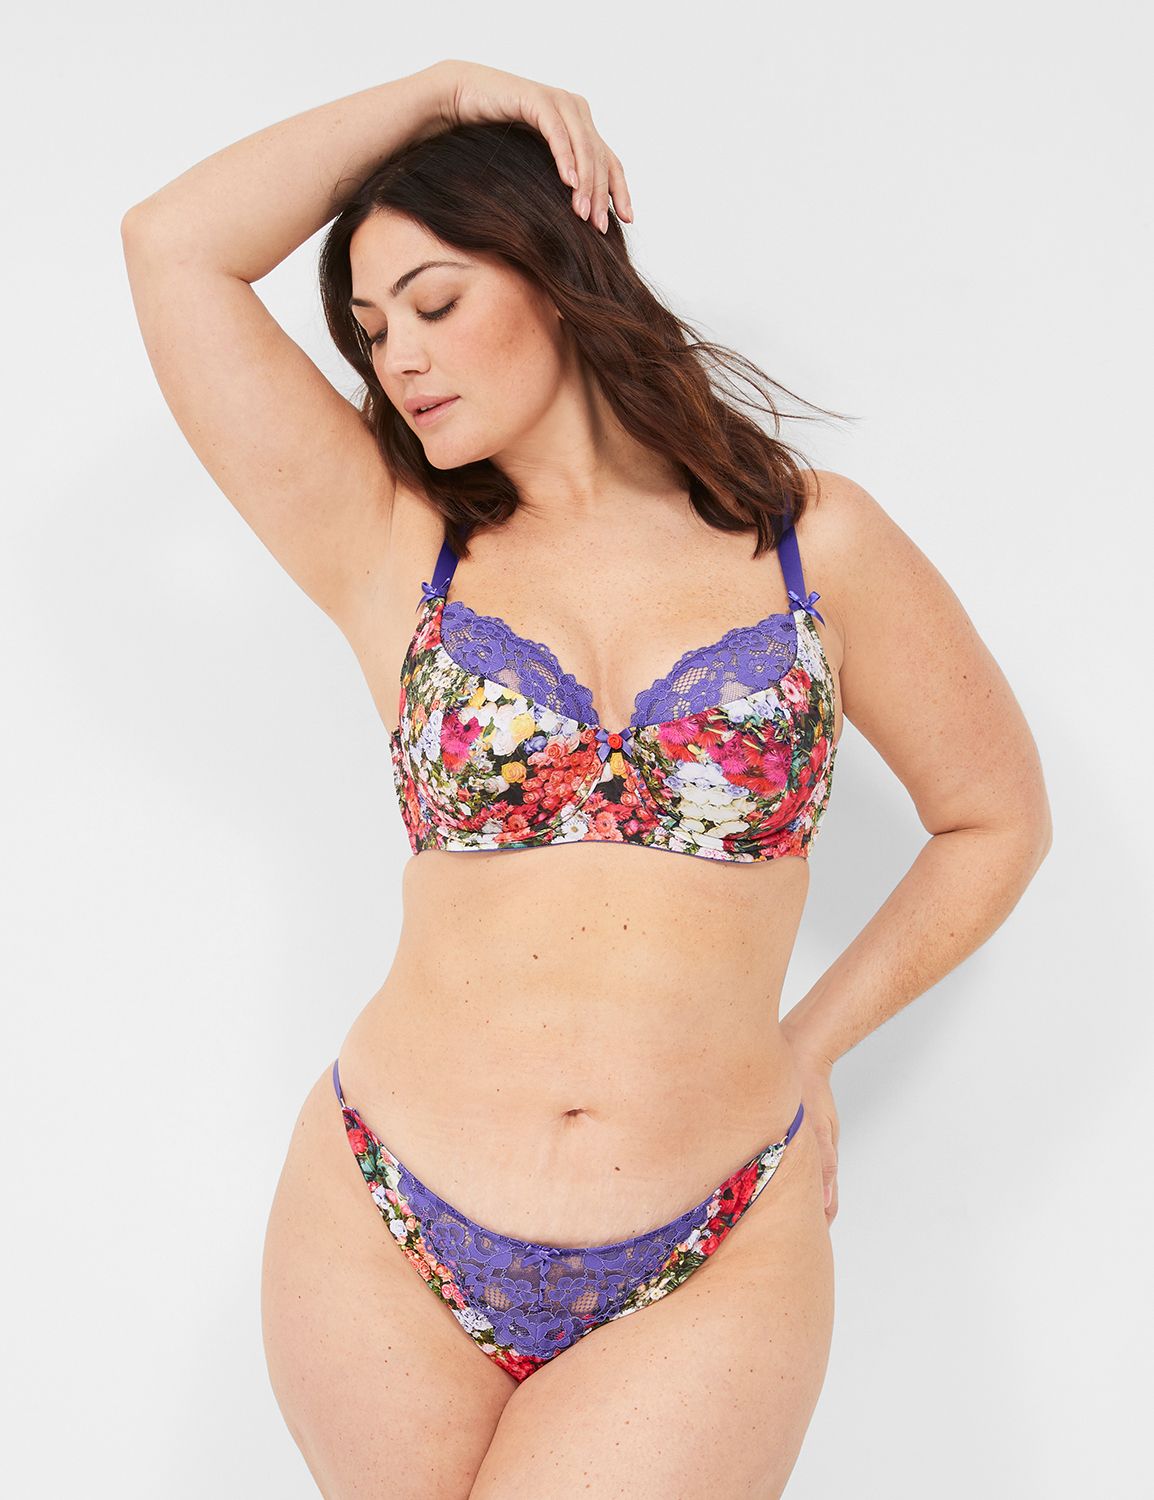 Plus Size Large Cup Bras: Cups F To K